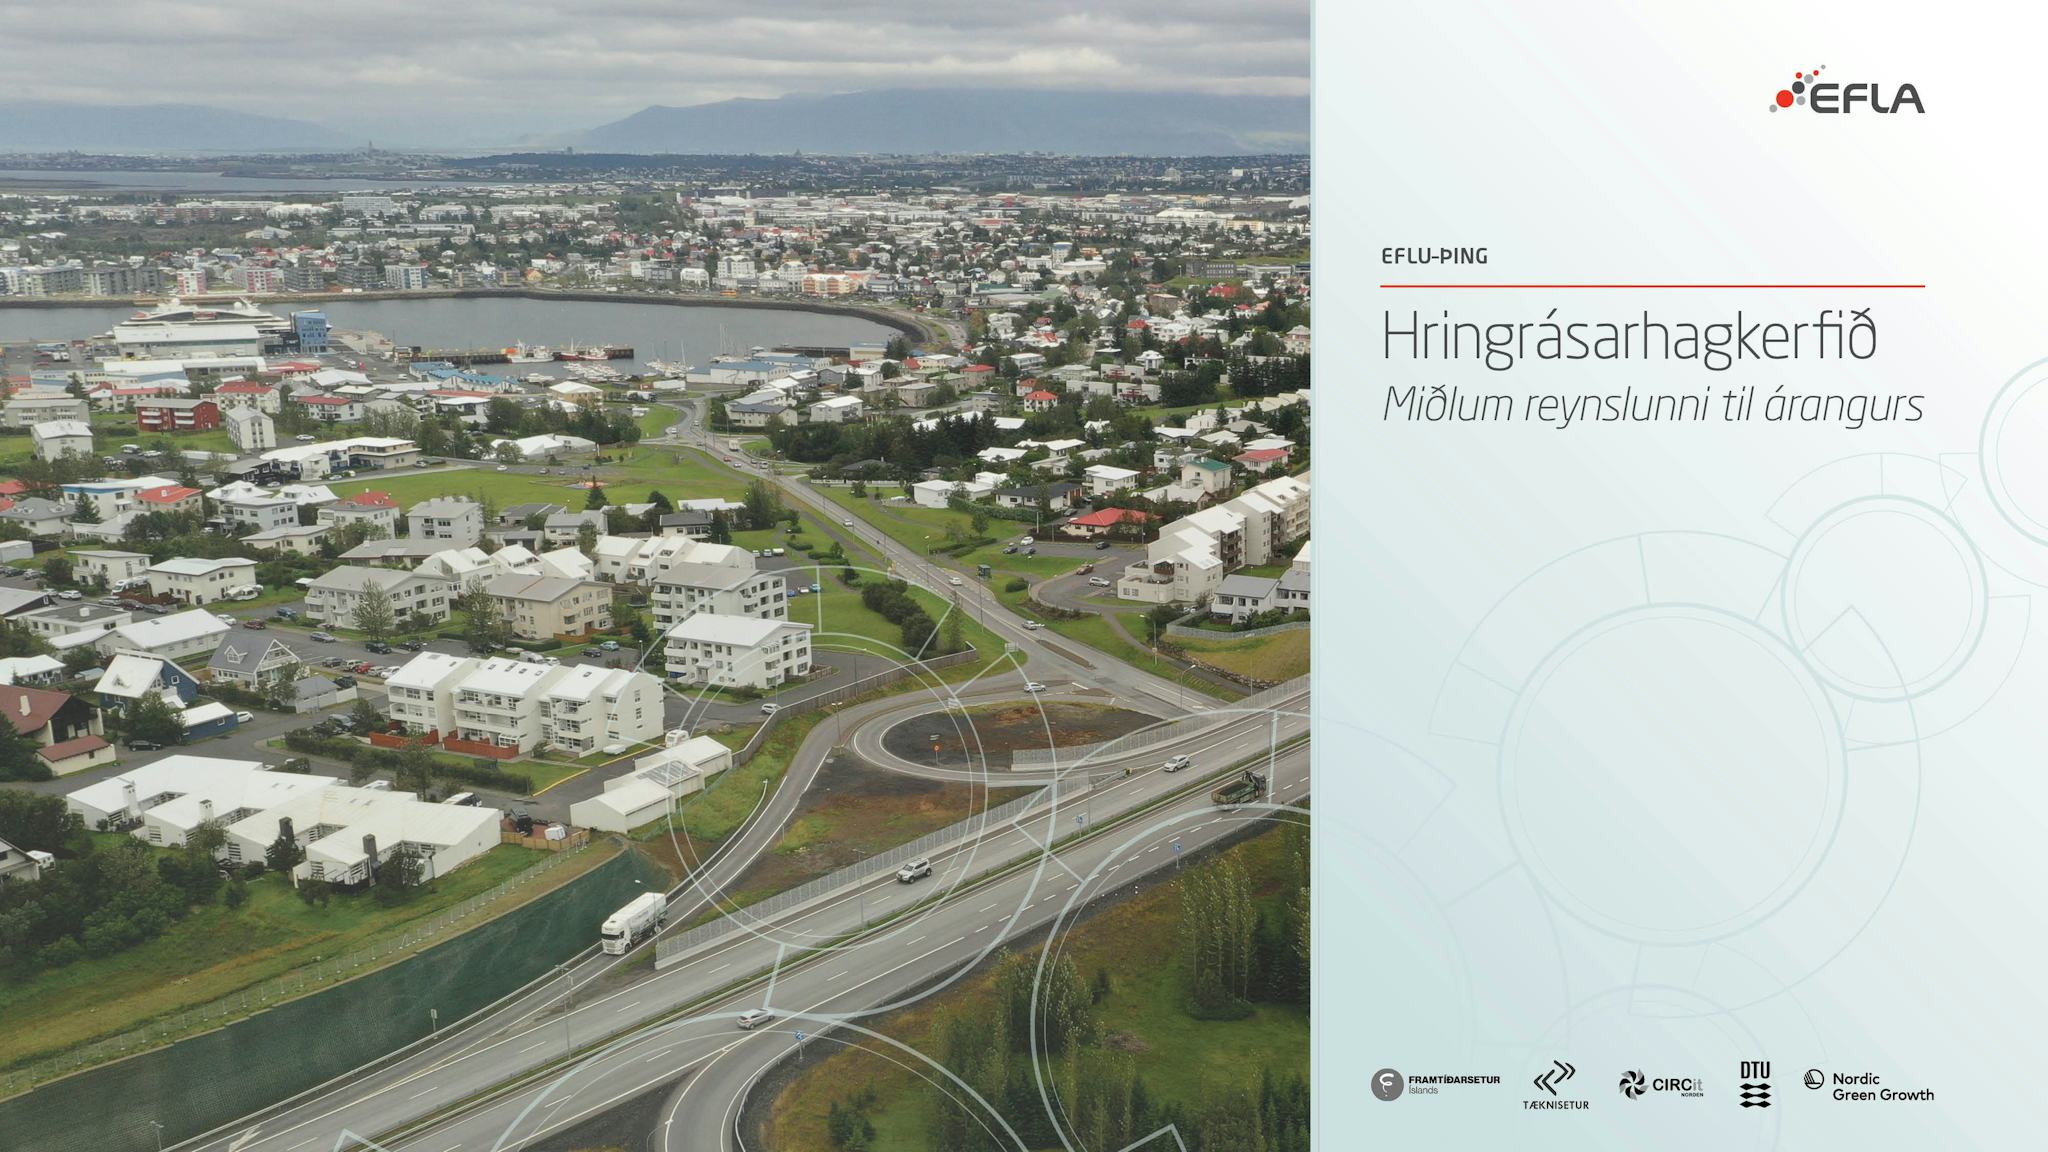 The photo shows an aerial view of a cityscape with residential area, roads and river, alongside texts in Icelandic